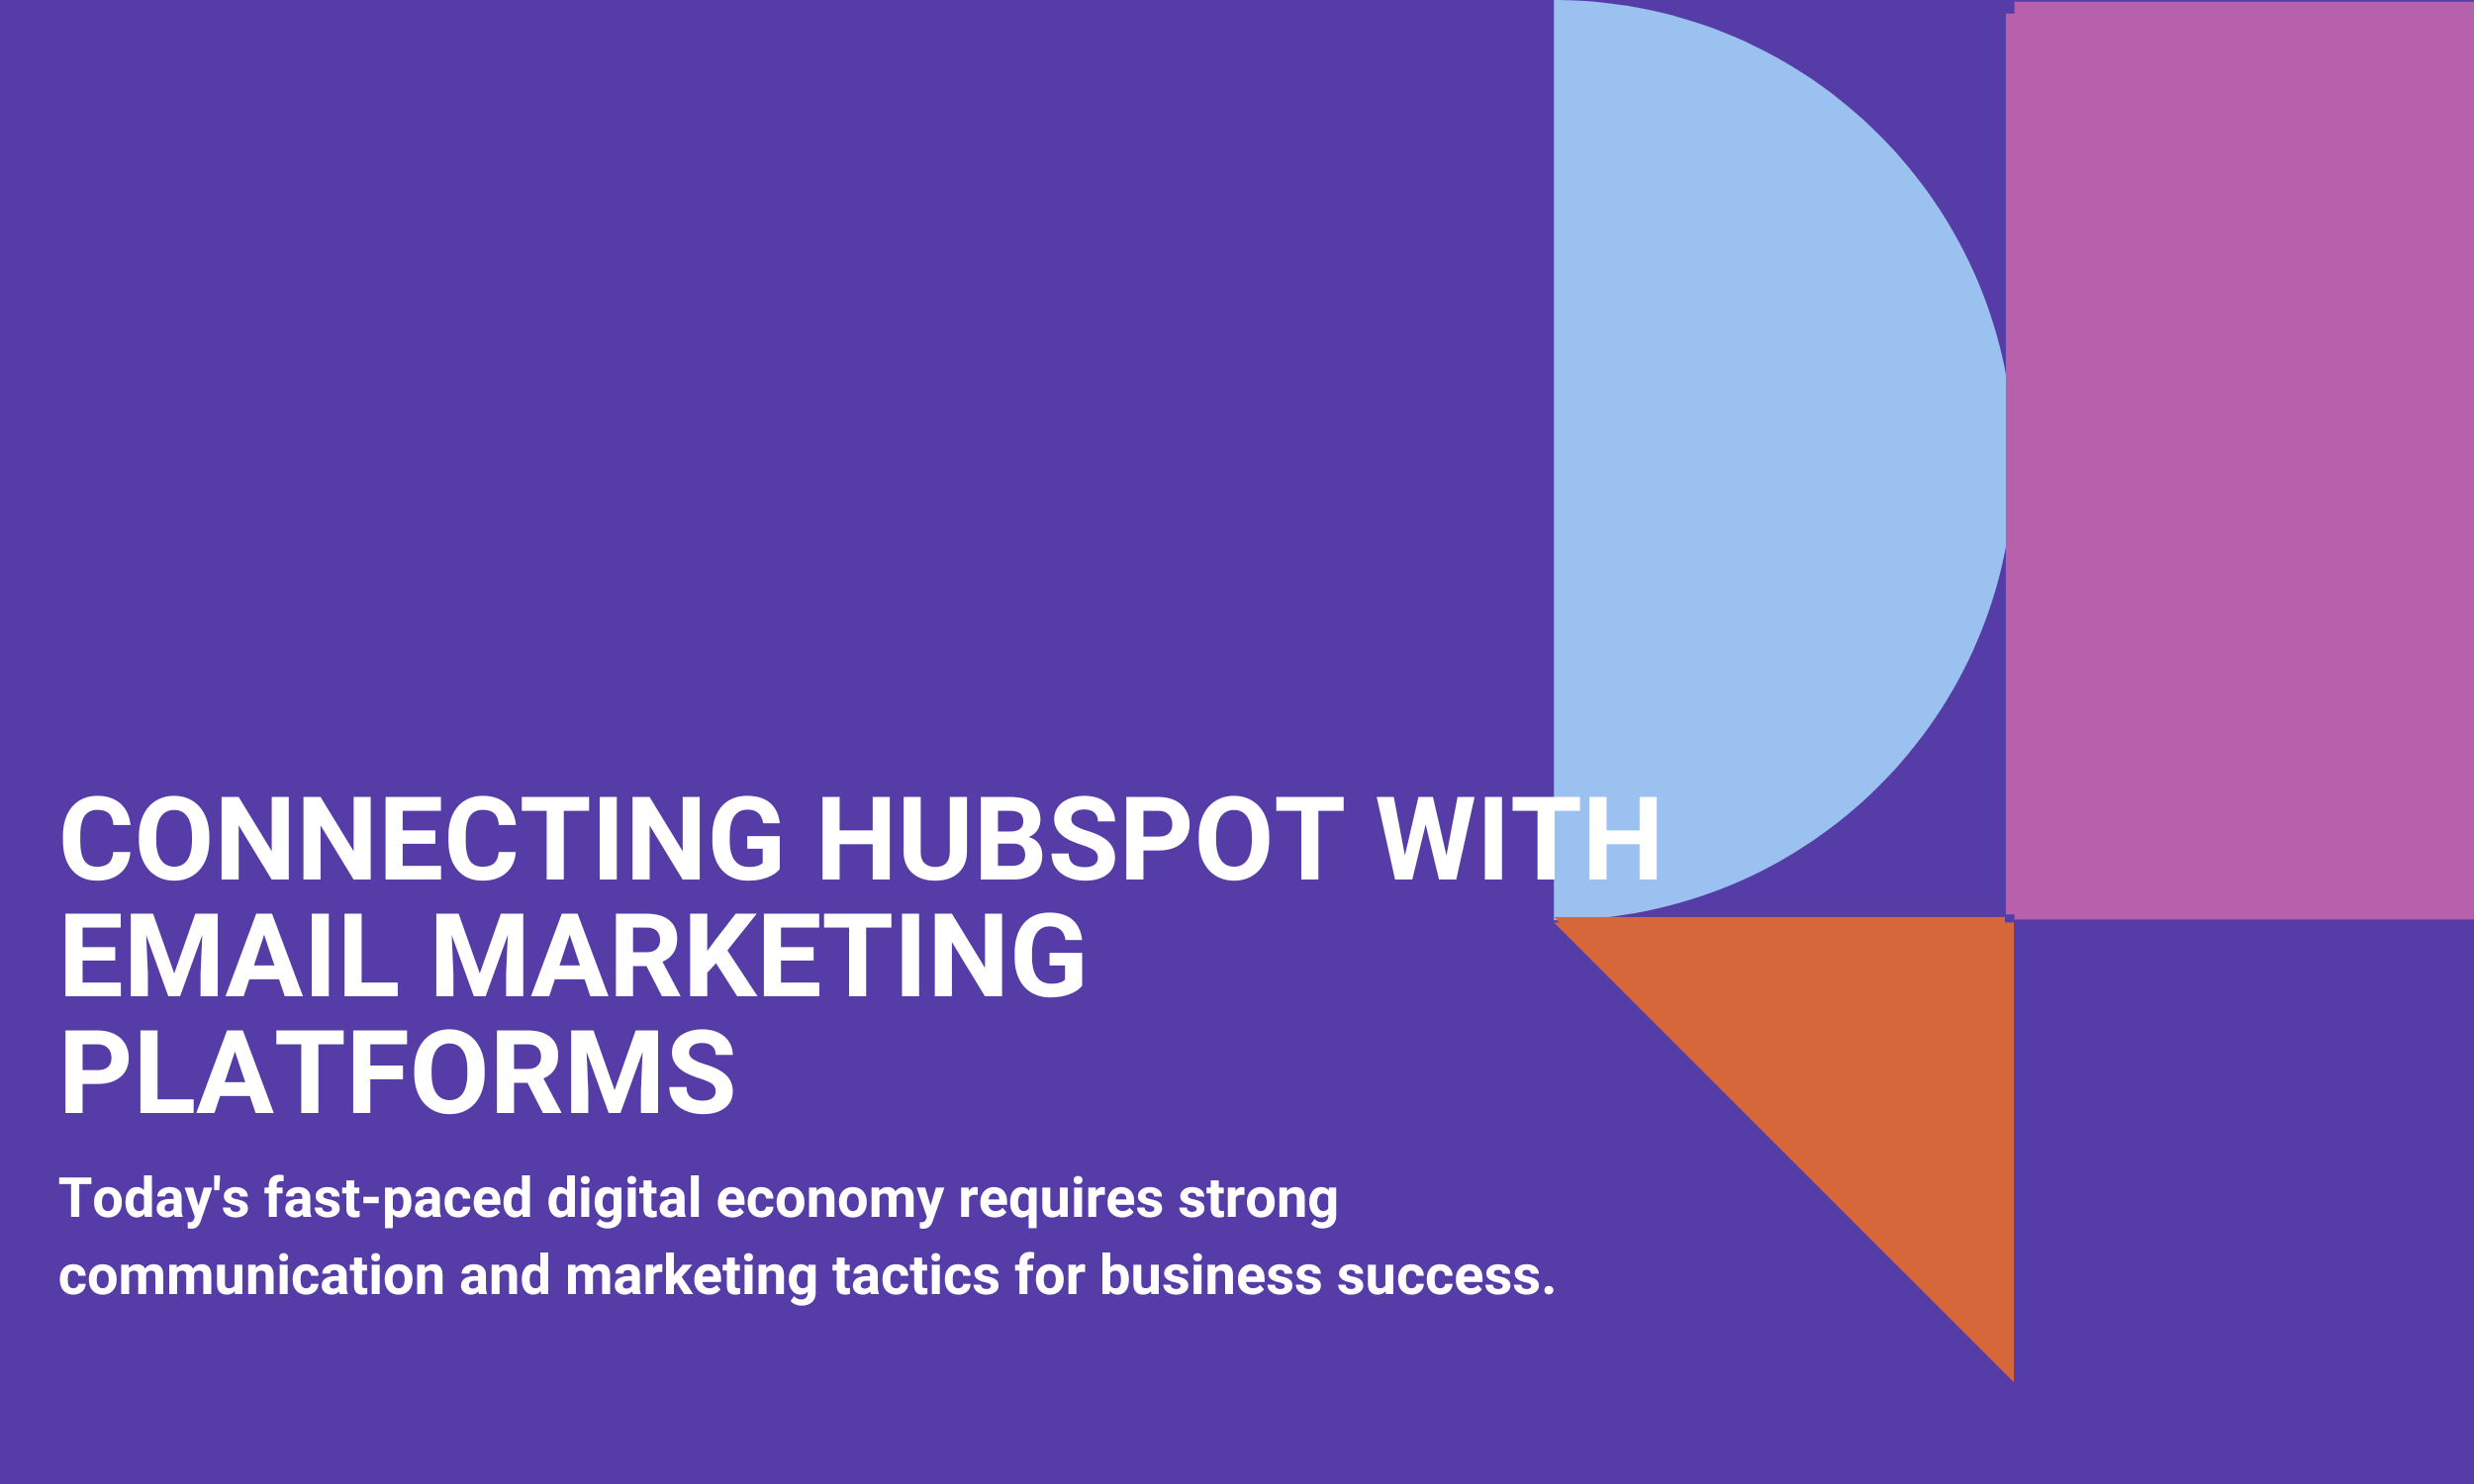 Connecting HubSpot with Email Marketing Platforms